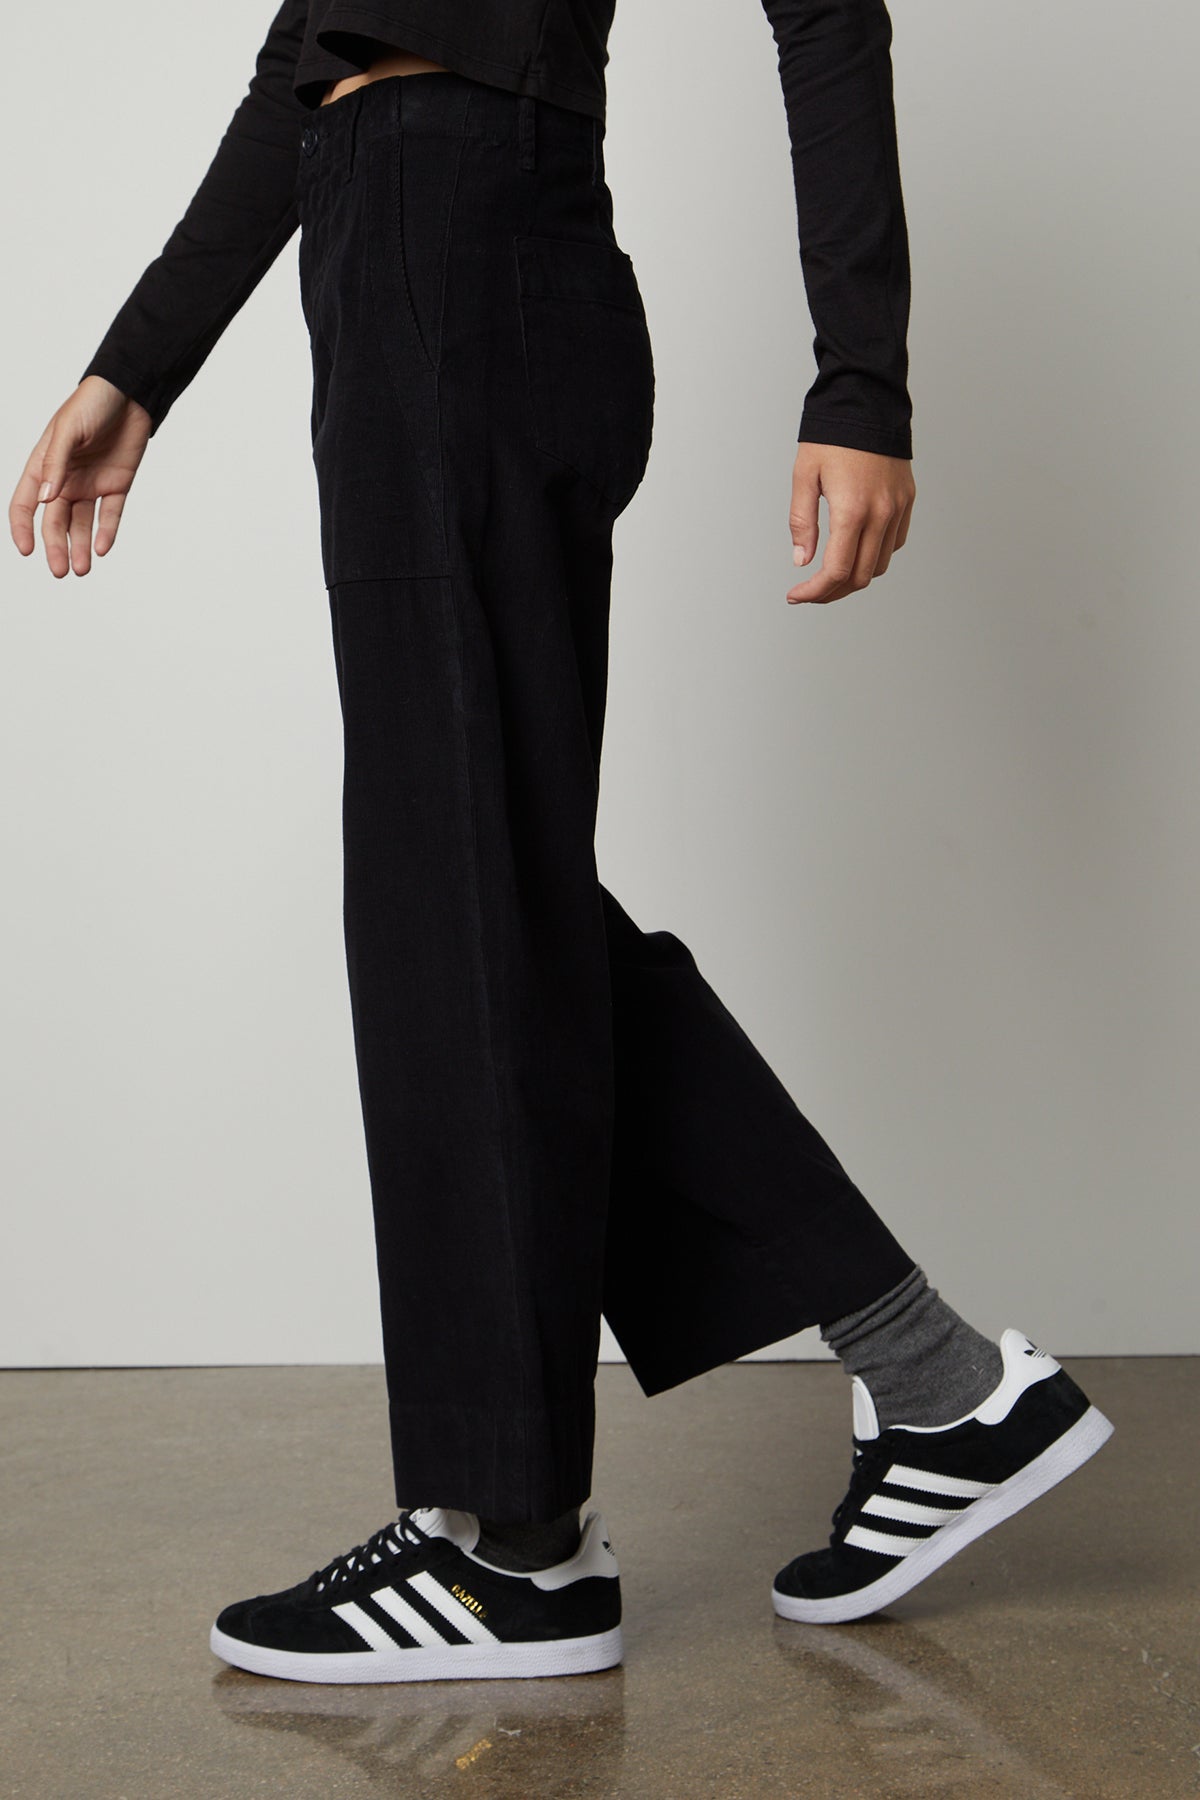 A woman wearing VERA CORDUROY WIDE LEG PANTS by Velvet by Graham & Spencer and sneakers.-26861576454337